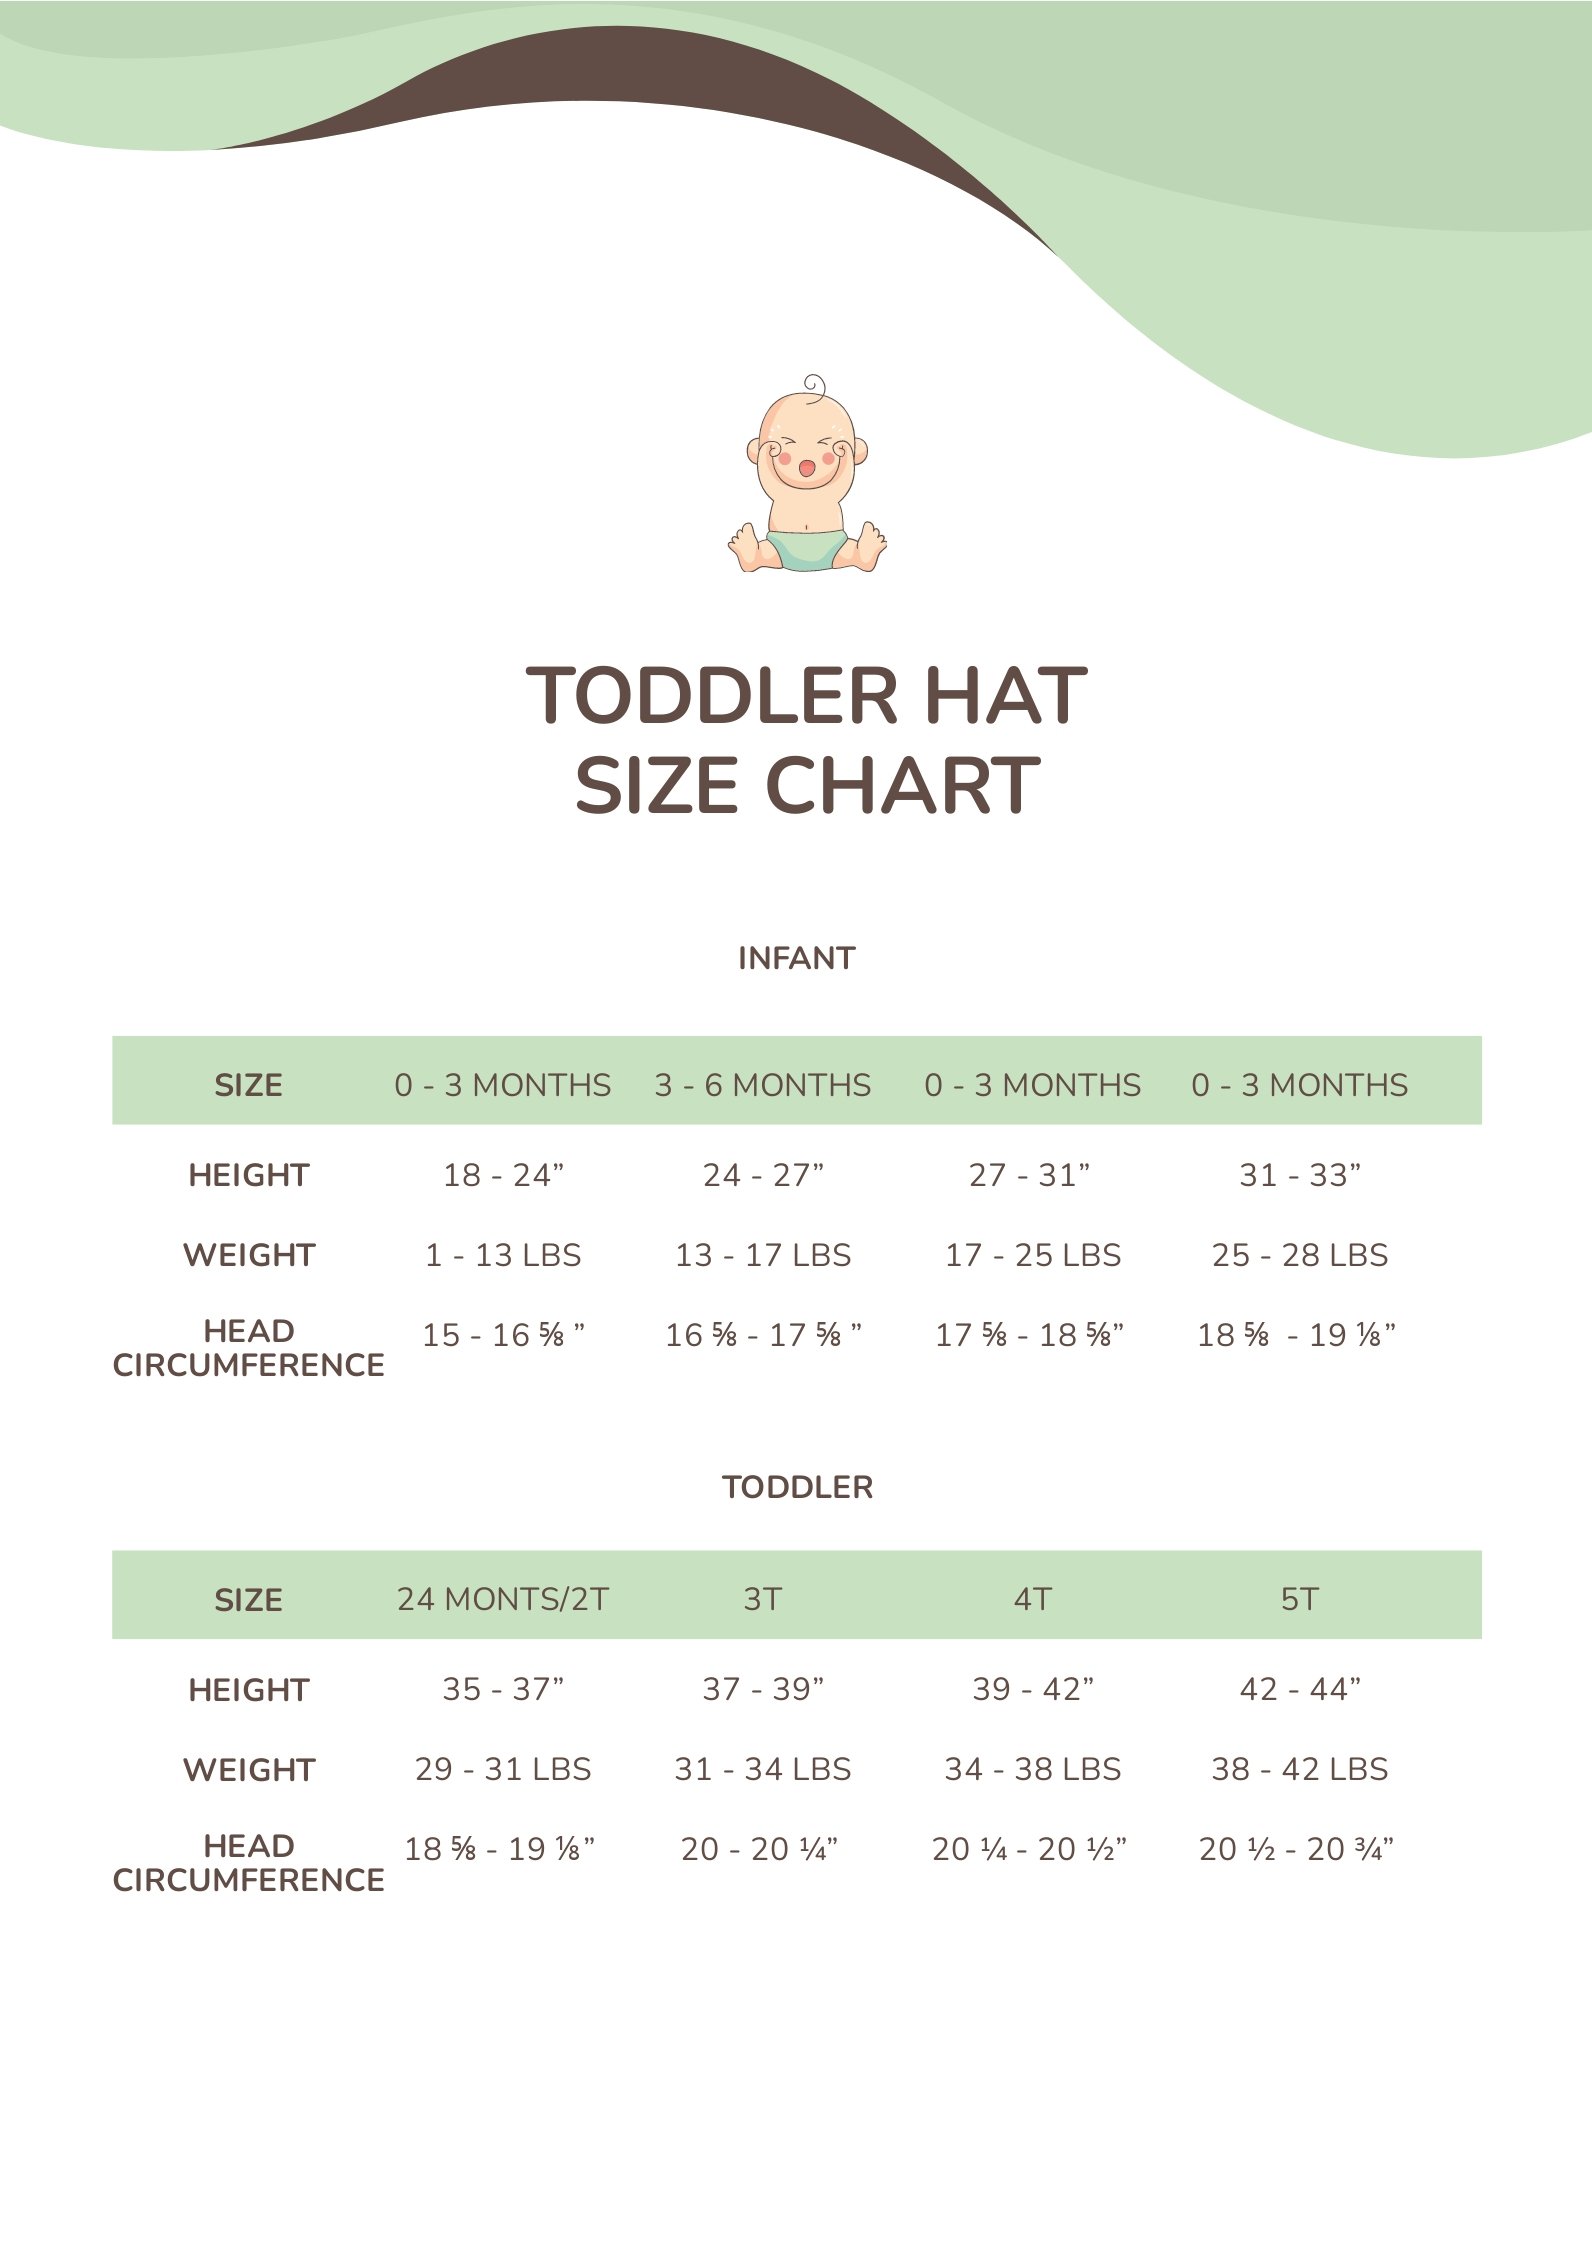 Toddler Hat Size Chart in PDF